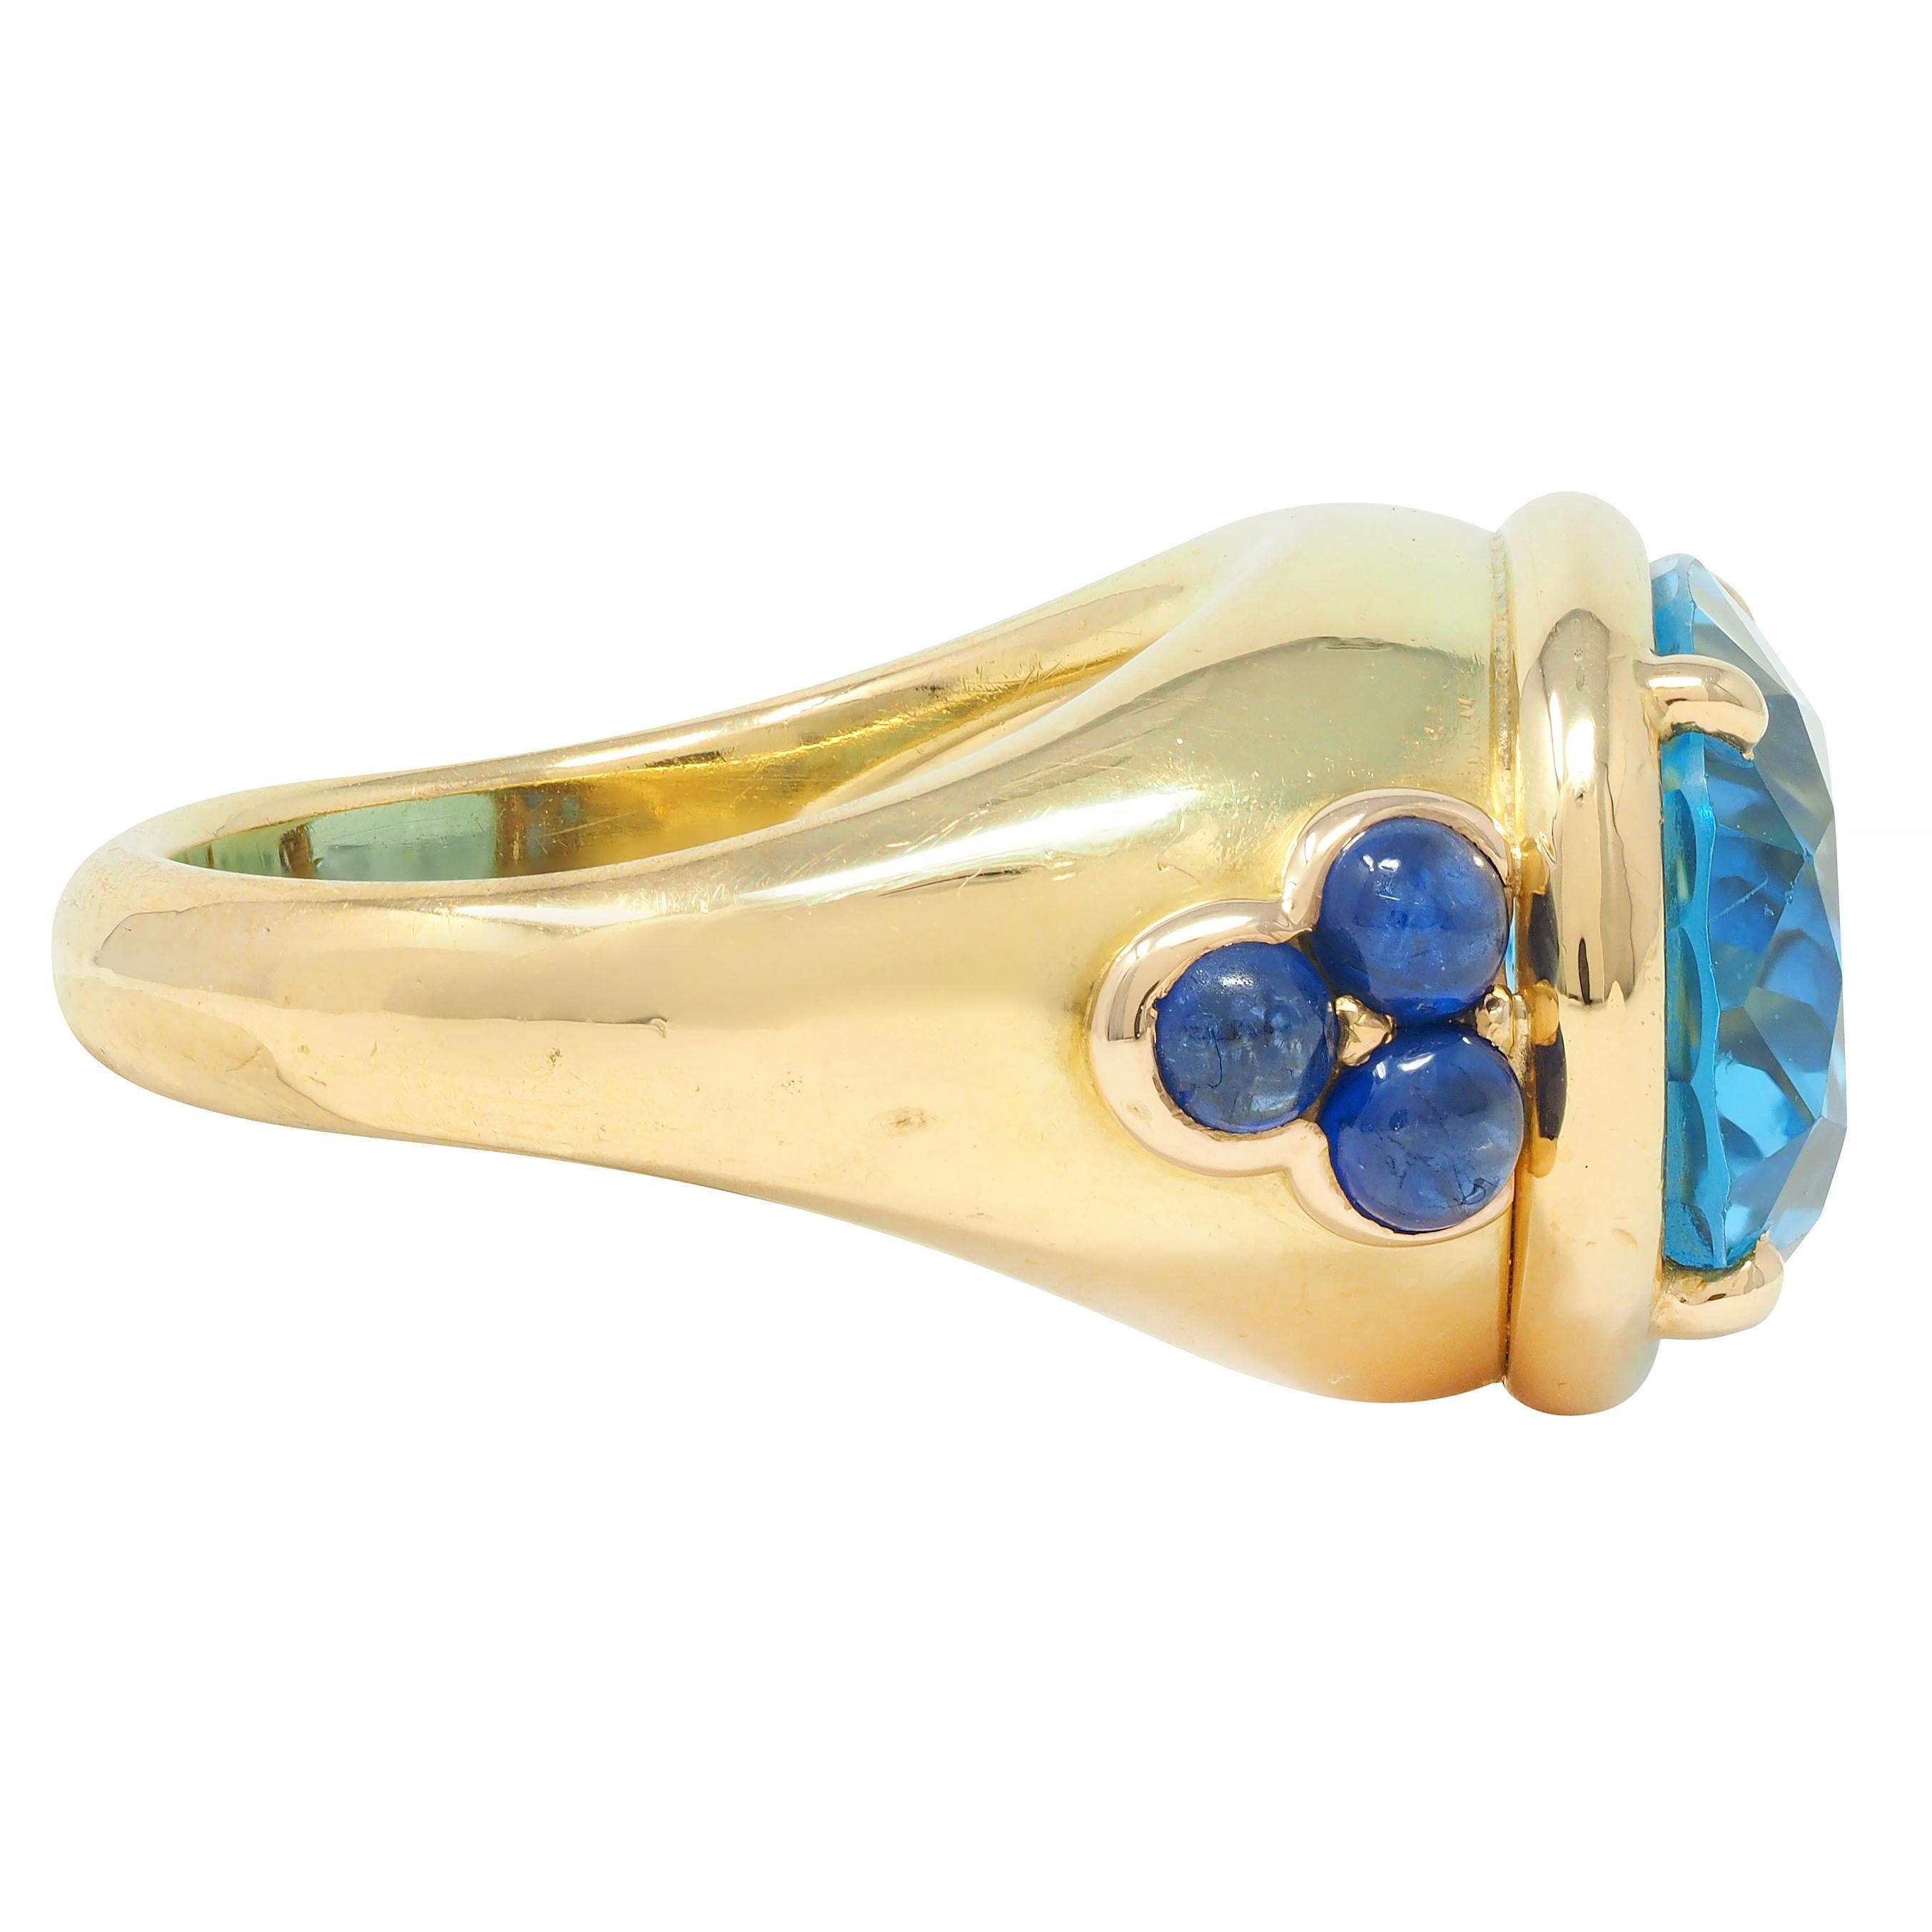 Oval Cut Contemporary 12.05 CTW Topaz Sapphire 18 Karat Yellow Gold Cocktail Ring For Sale